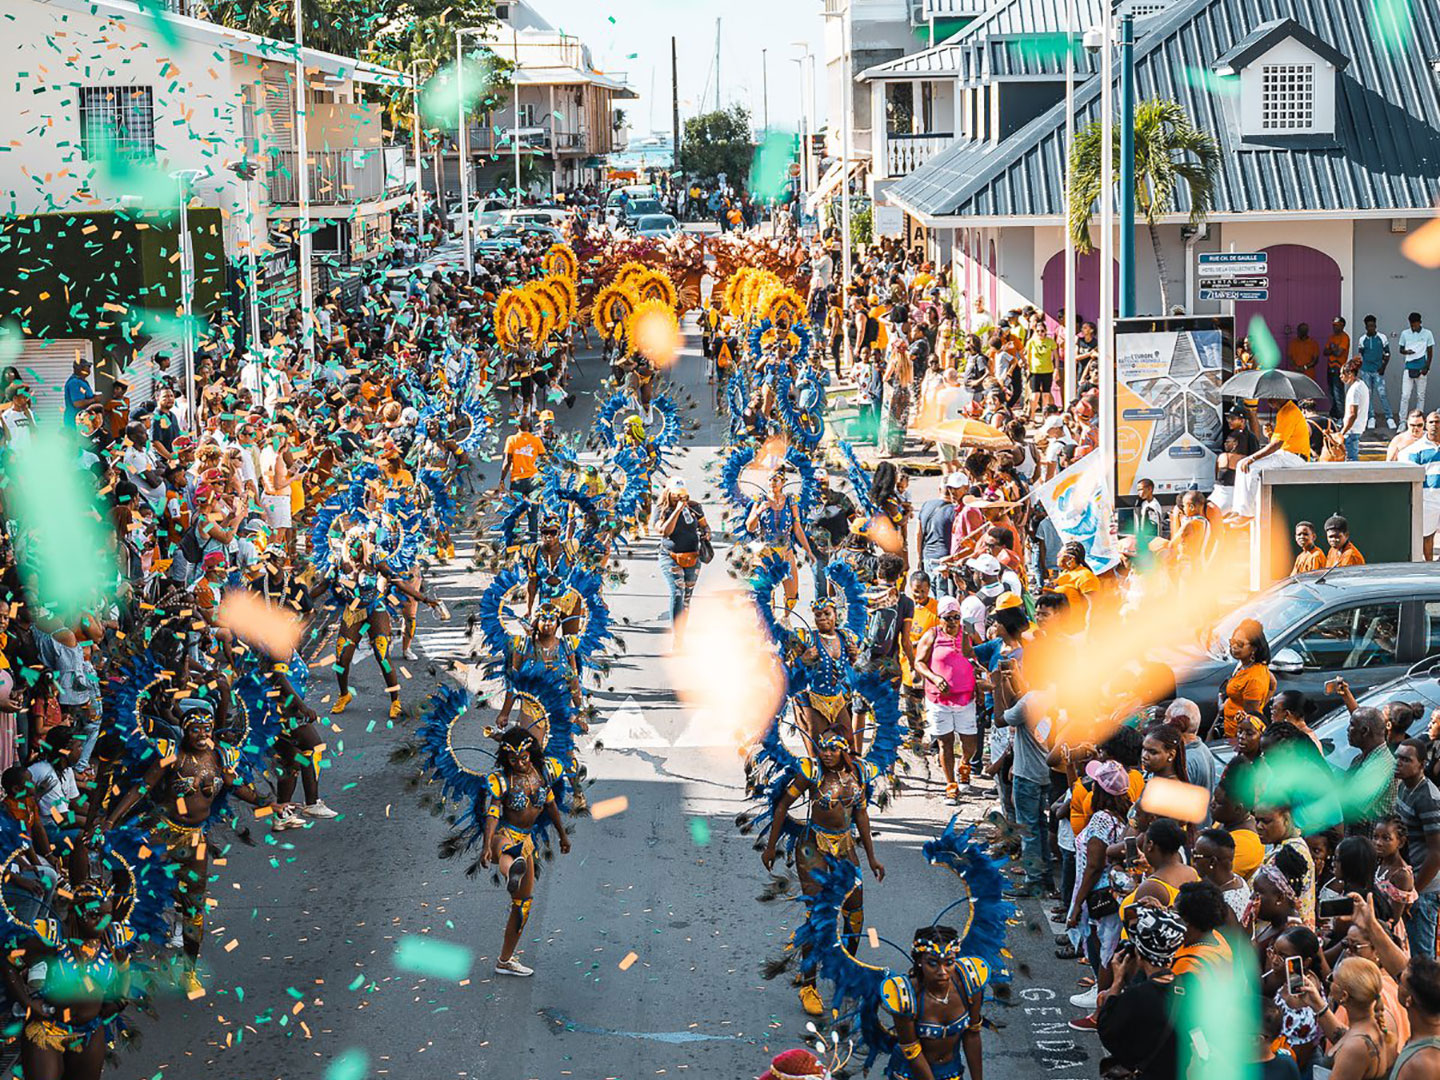 St. Maarten/St. Martin’s Carnival: A Vibrant Celebration of Culture and Tradition